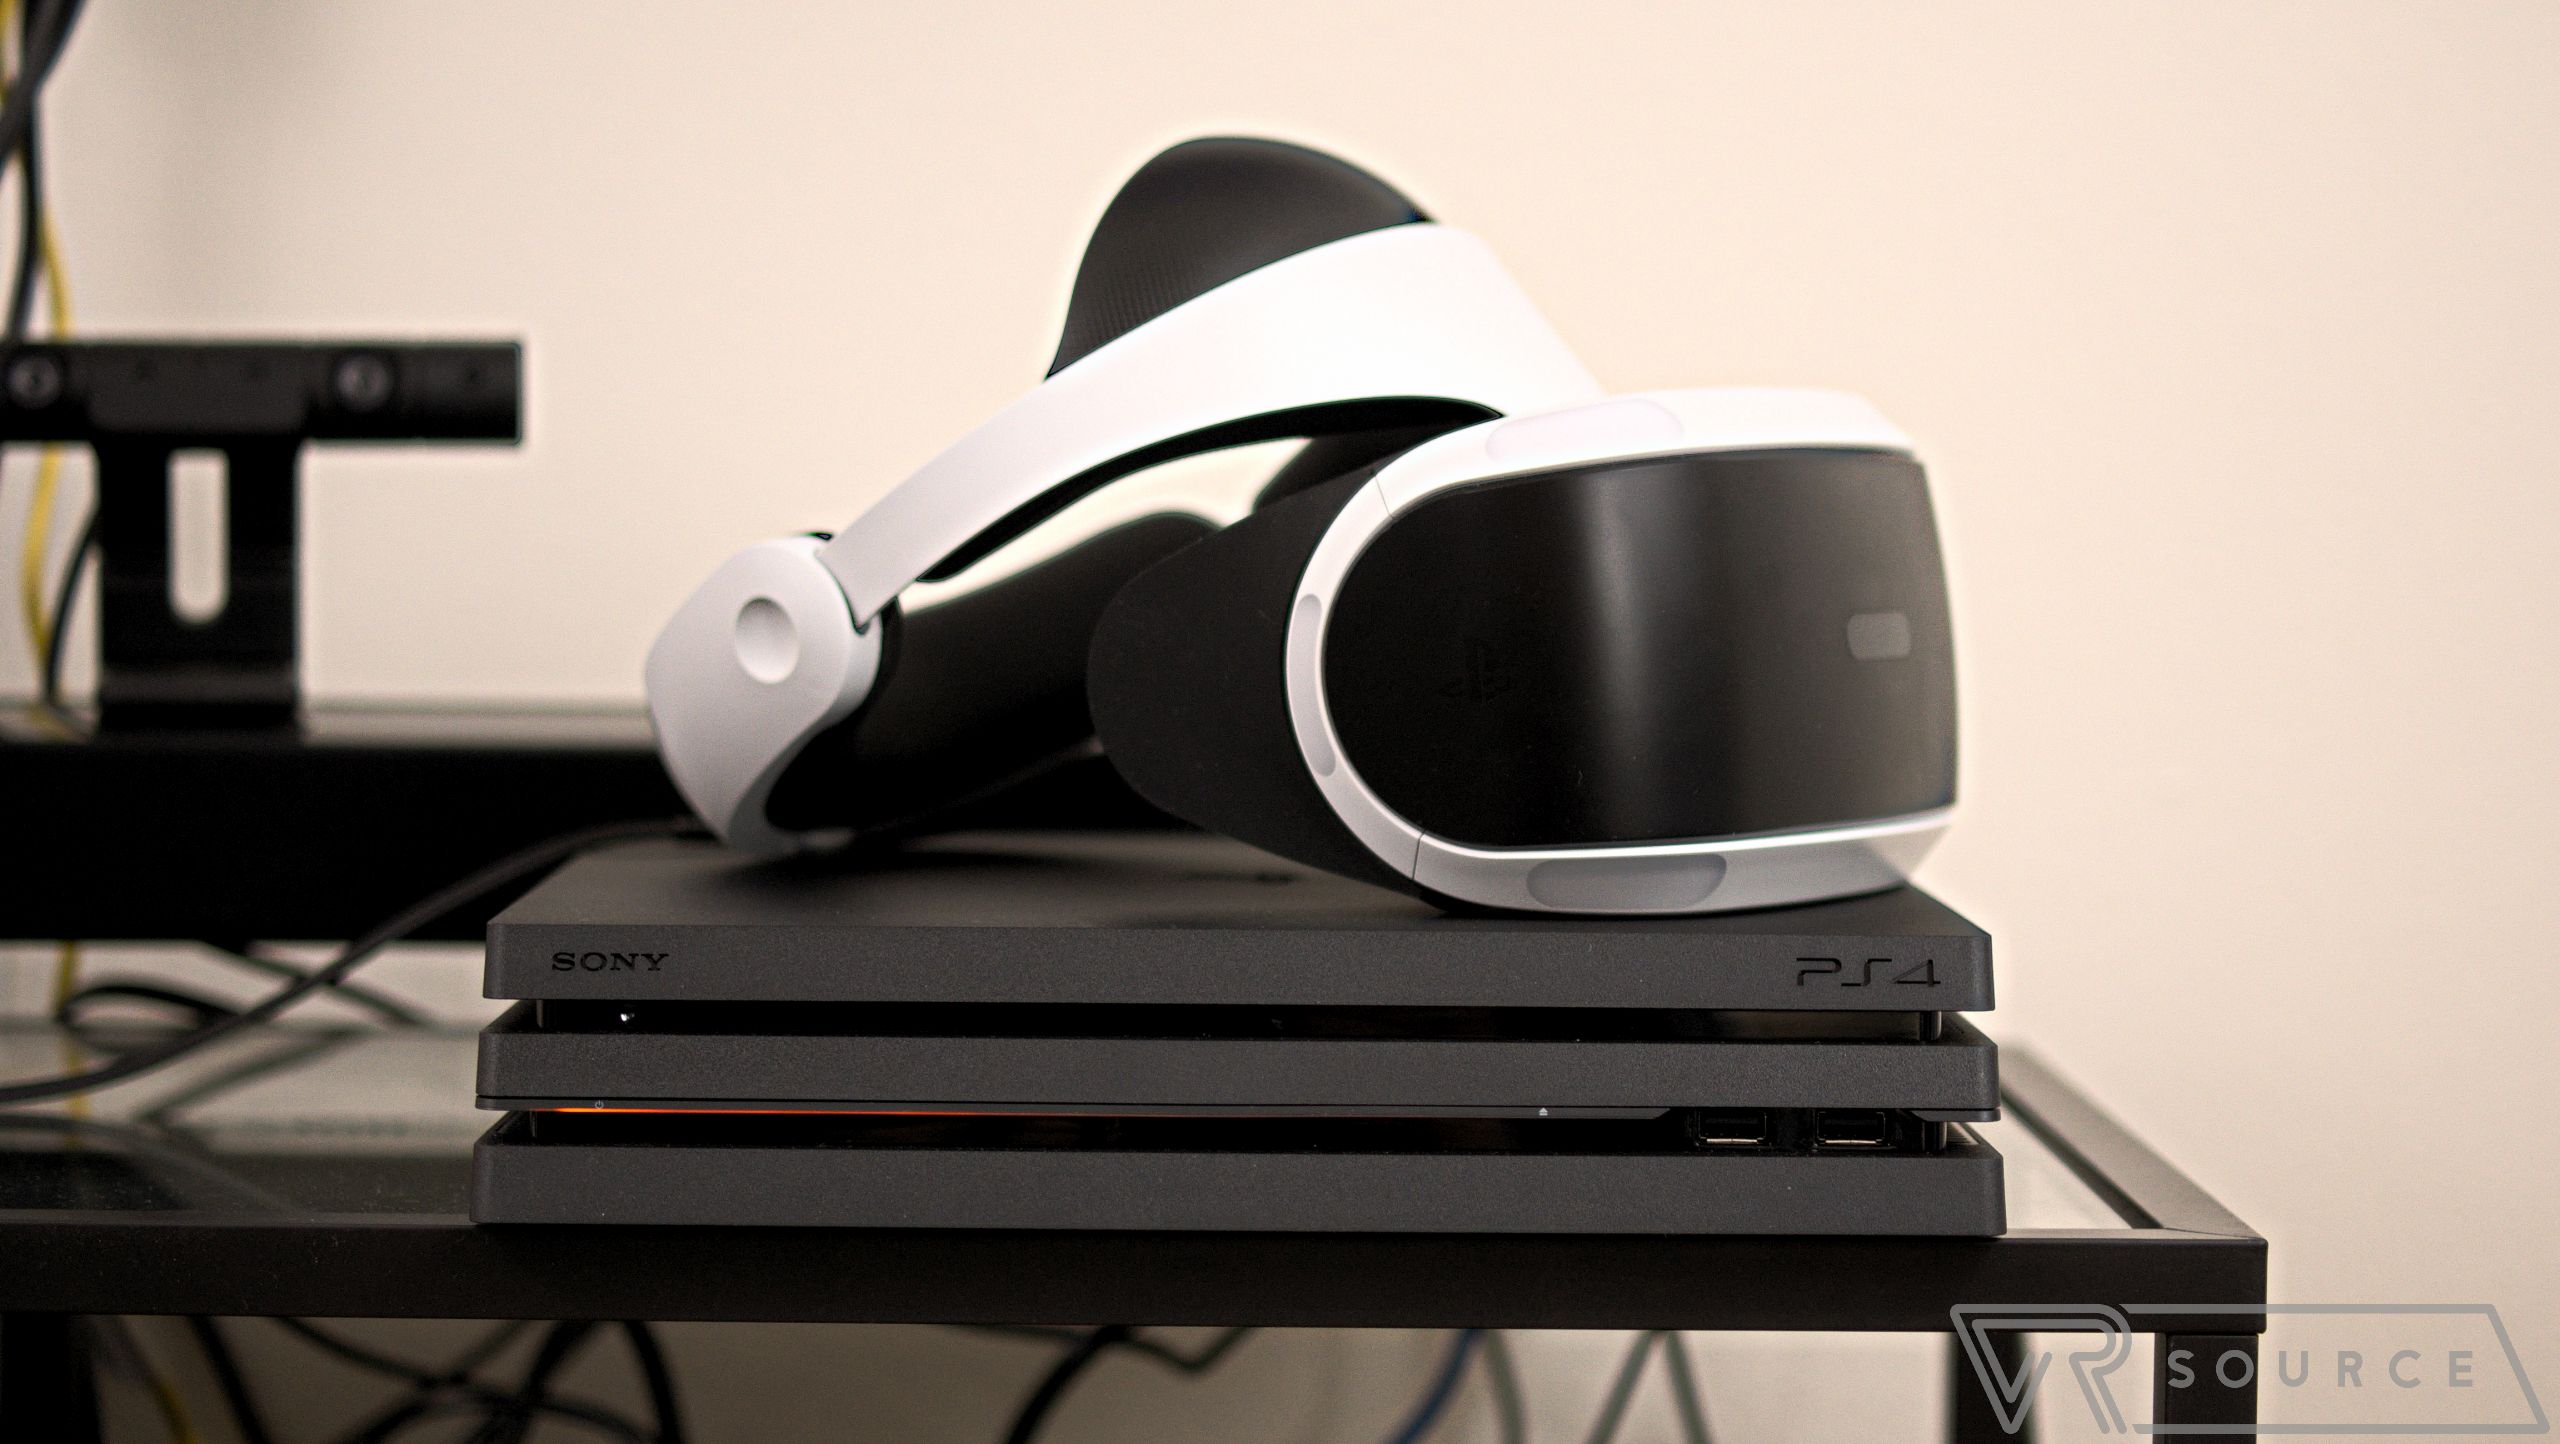 Does PlayStation 4 Pro really improve virtual reality performance